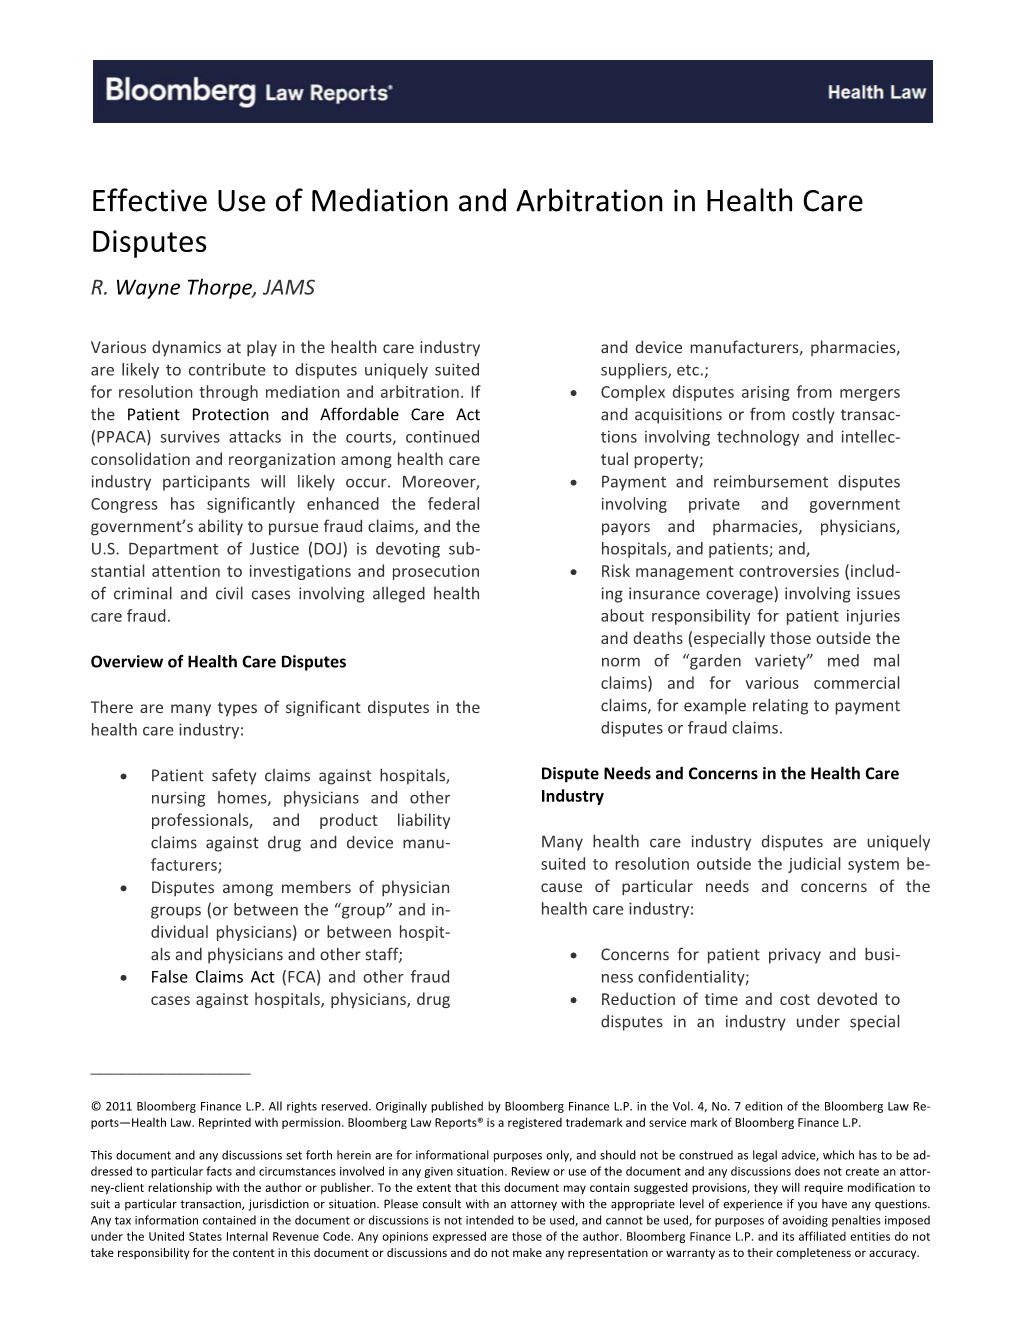 Effective Use of Mediation and Arbitration in Health Care Disputes R